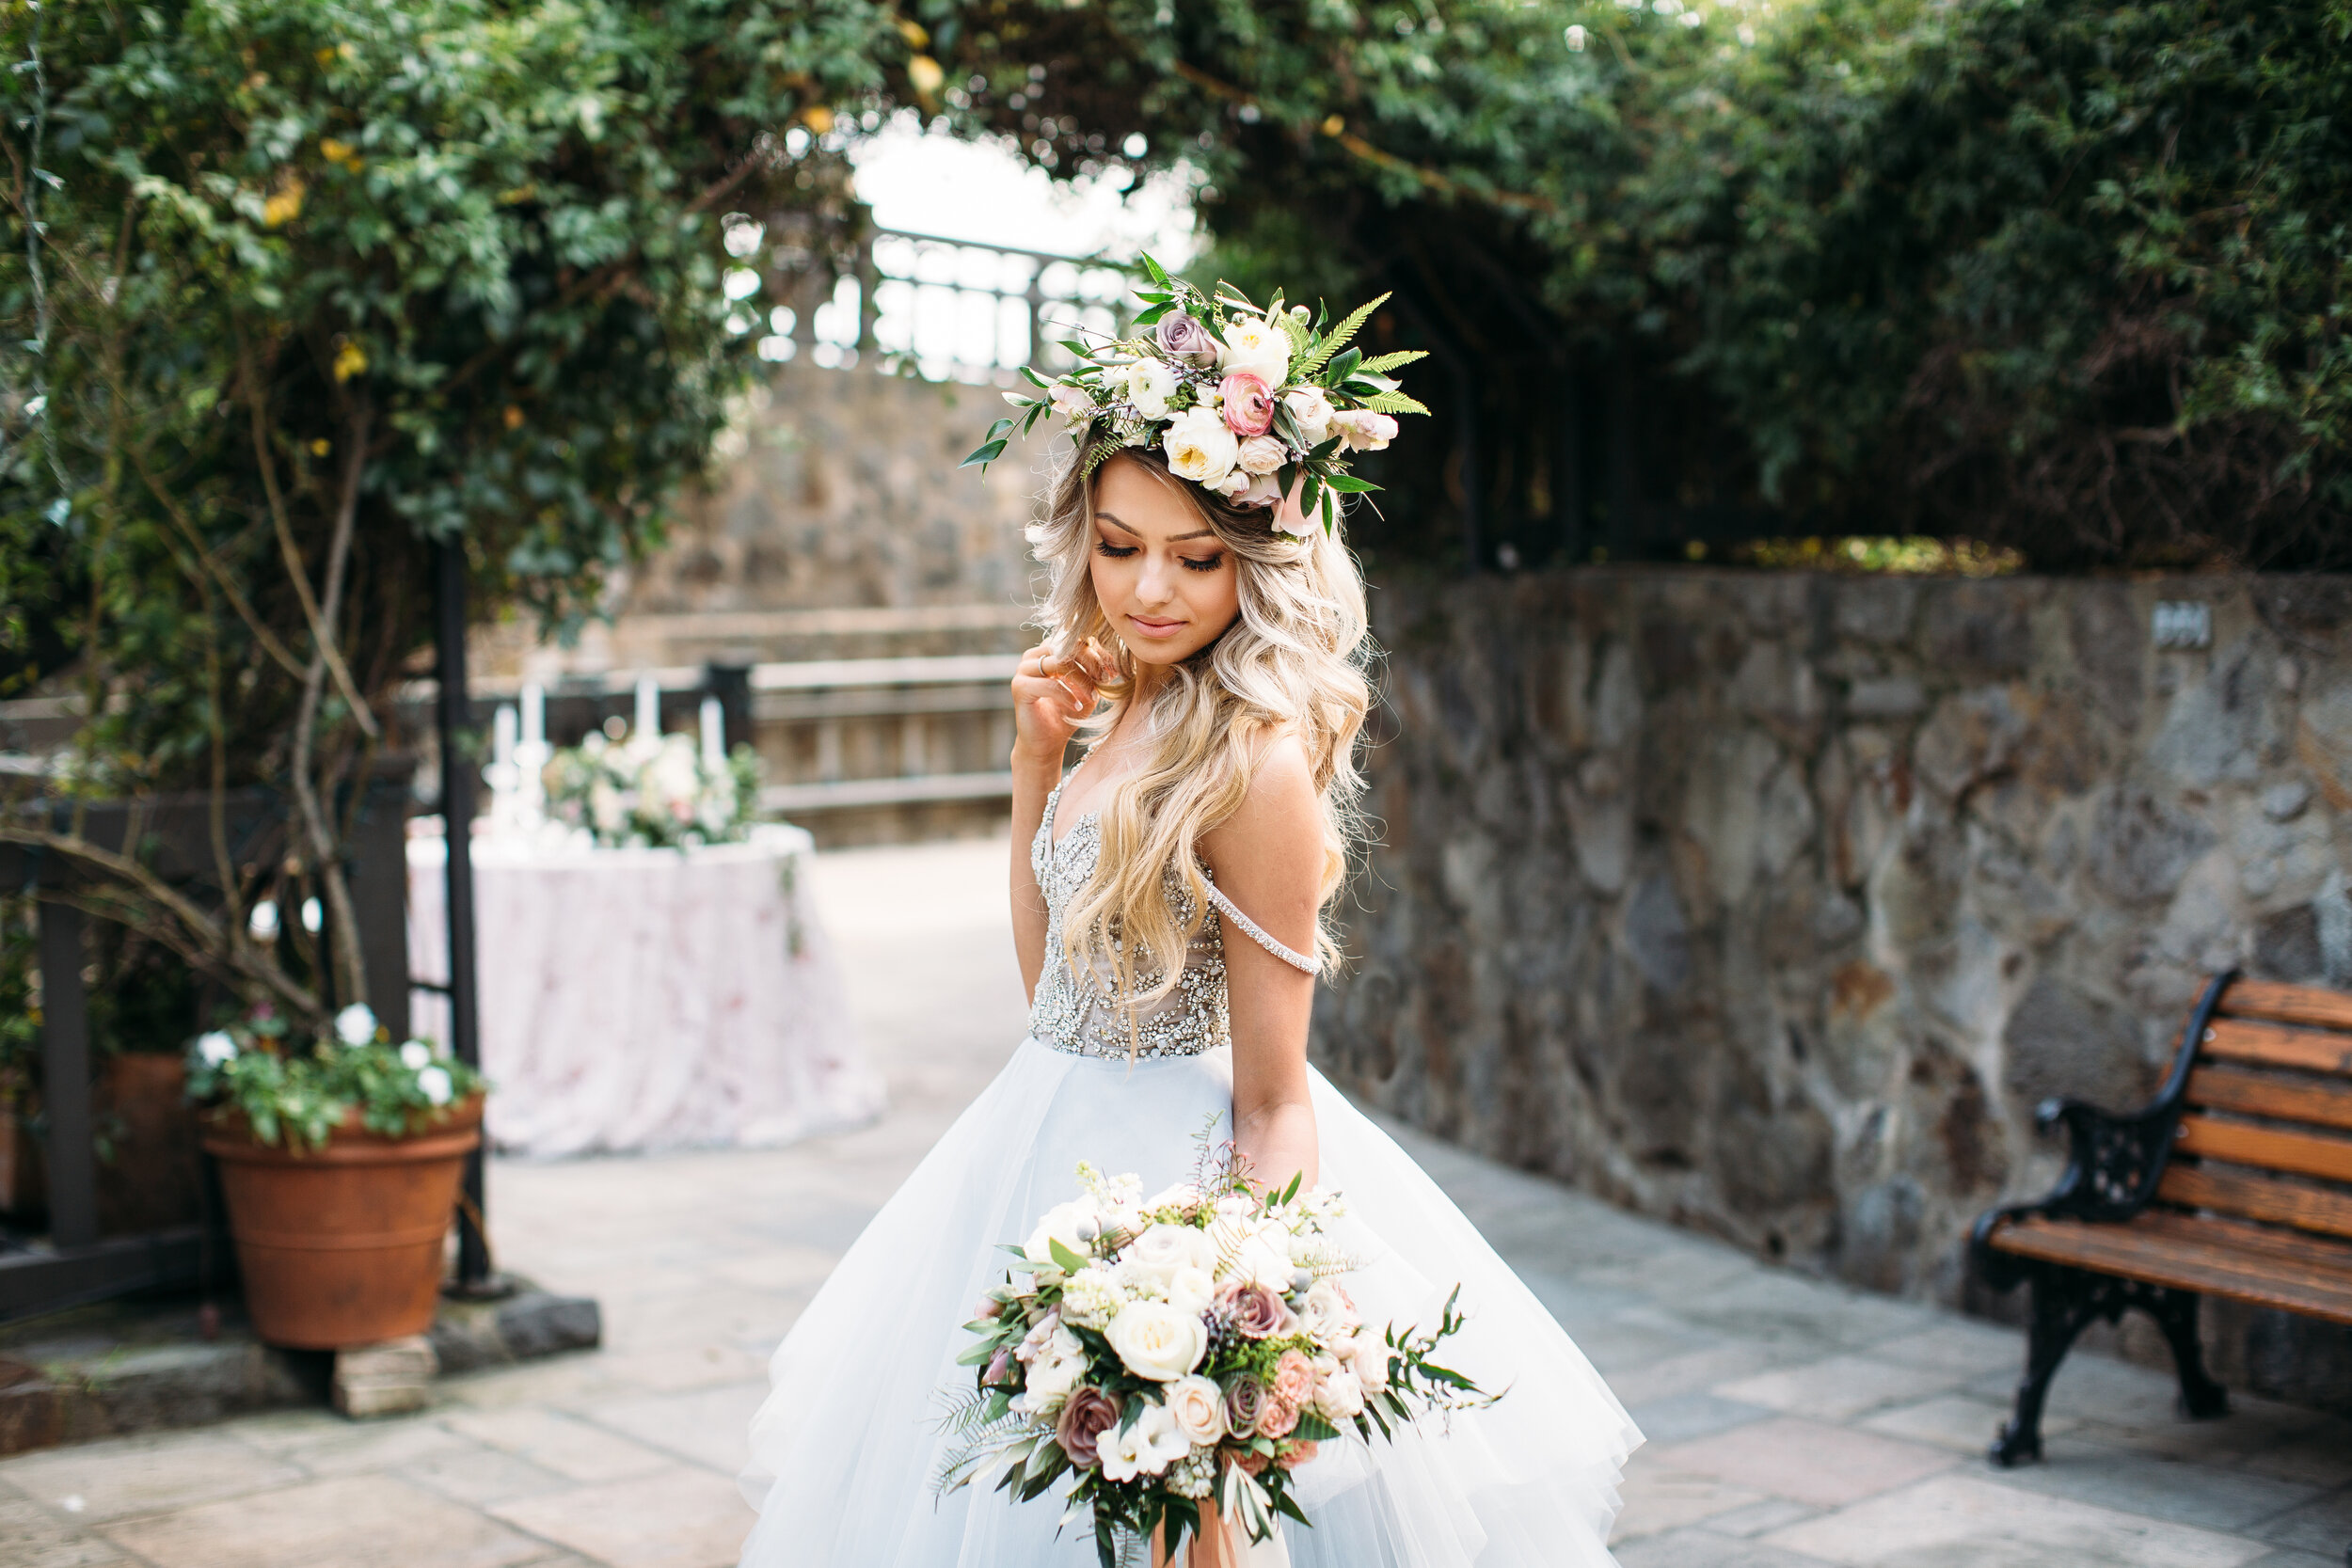 bride-happy-luxury-bridal-bouquet-blushes-whites-pinks-lavenders-upscale-flowing-ribbon-headpiece-inspiration-hayley-paige-northern-california-florist-violette-fleurs-anna-perevertaylo.jpg